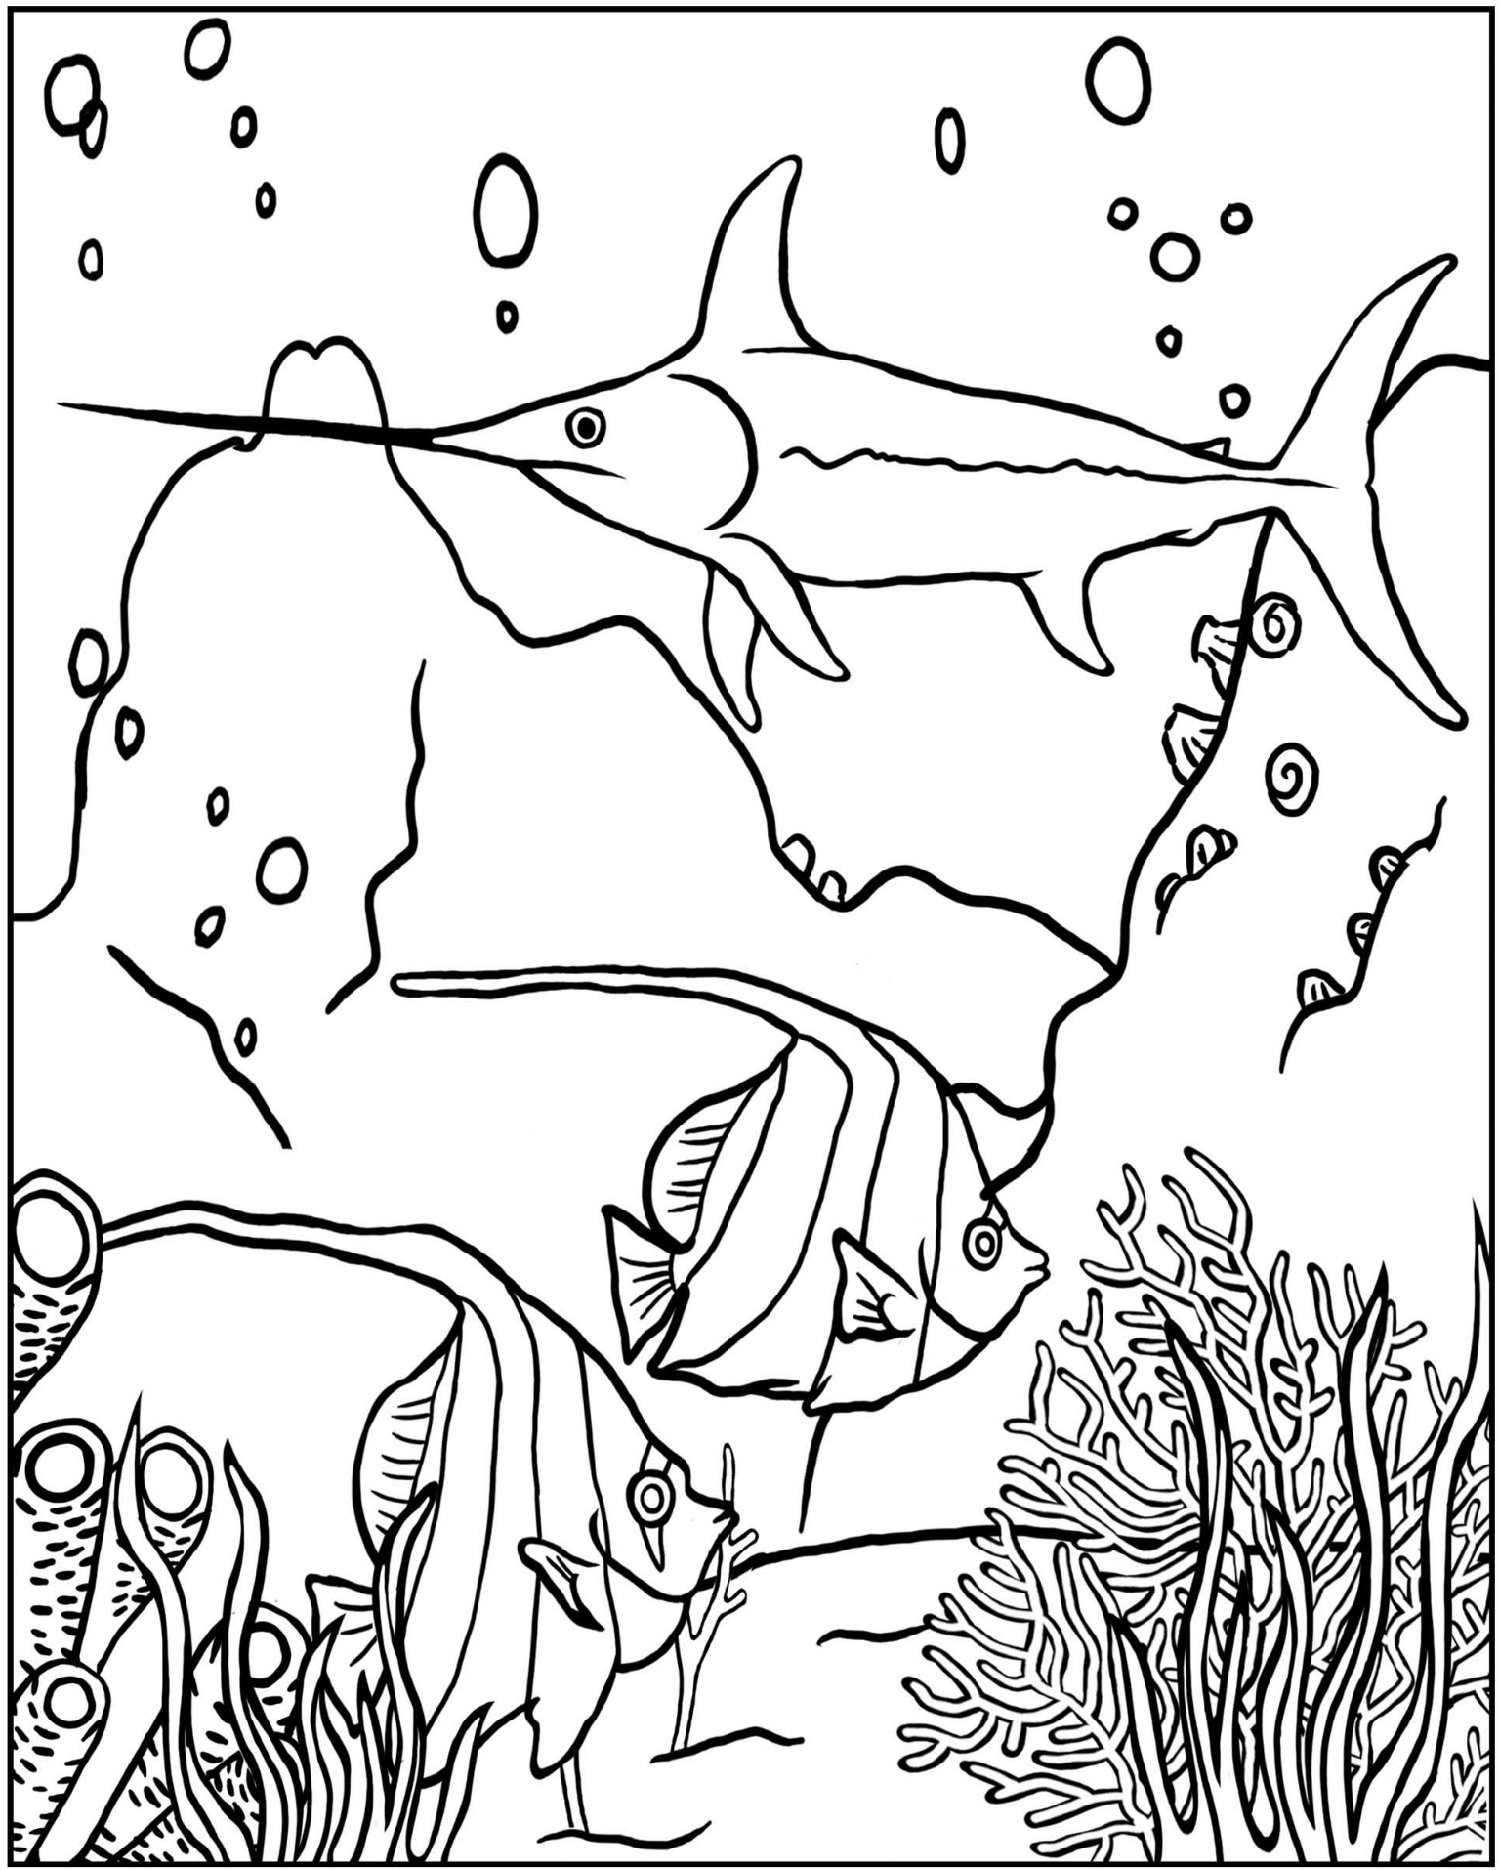 Ocean Life Coloring Pages at GetDrawings | Free download